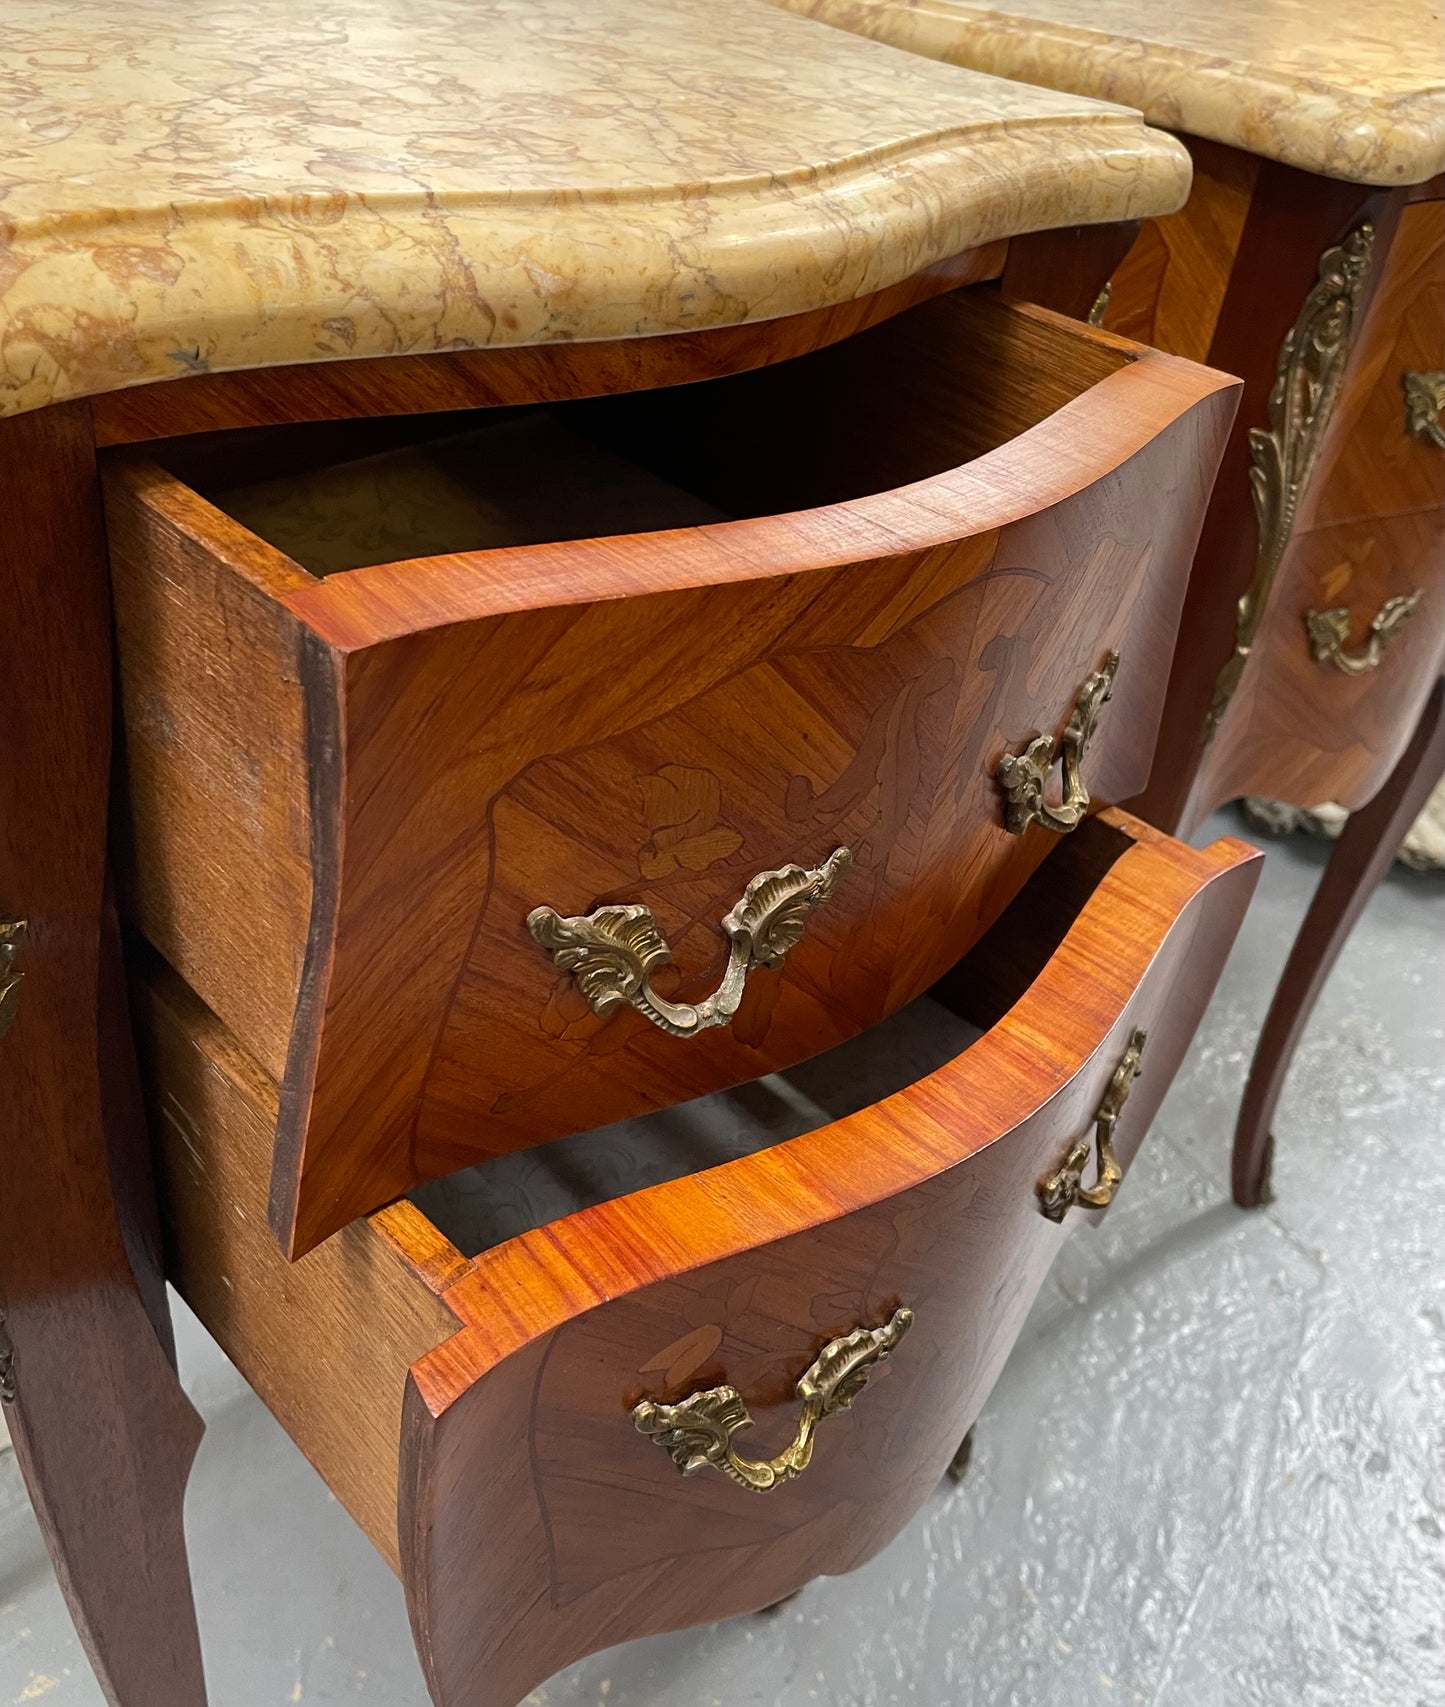 Pair of French Miniature Commode Bed Side Tables